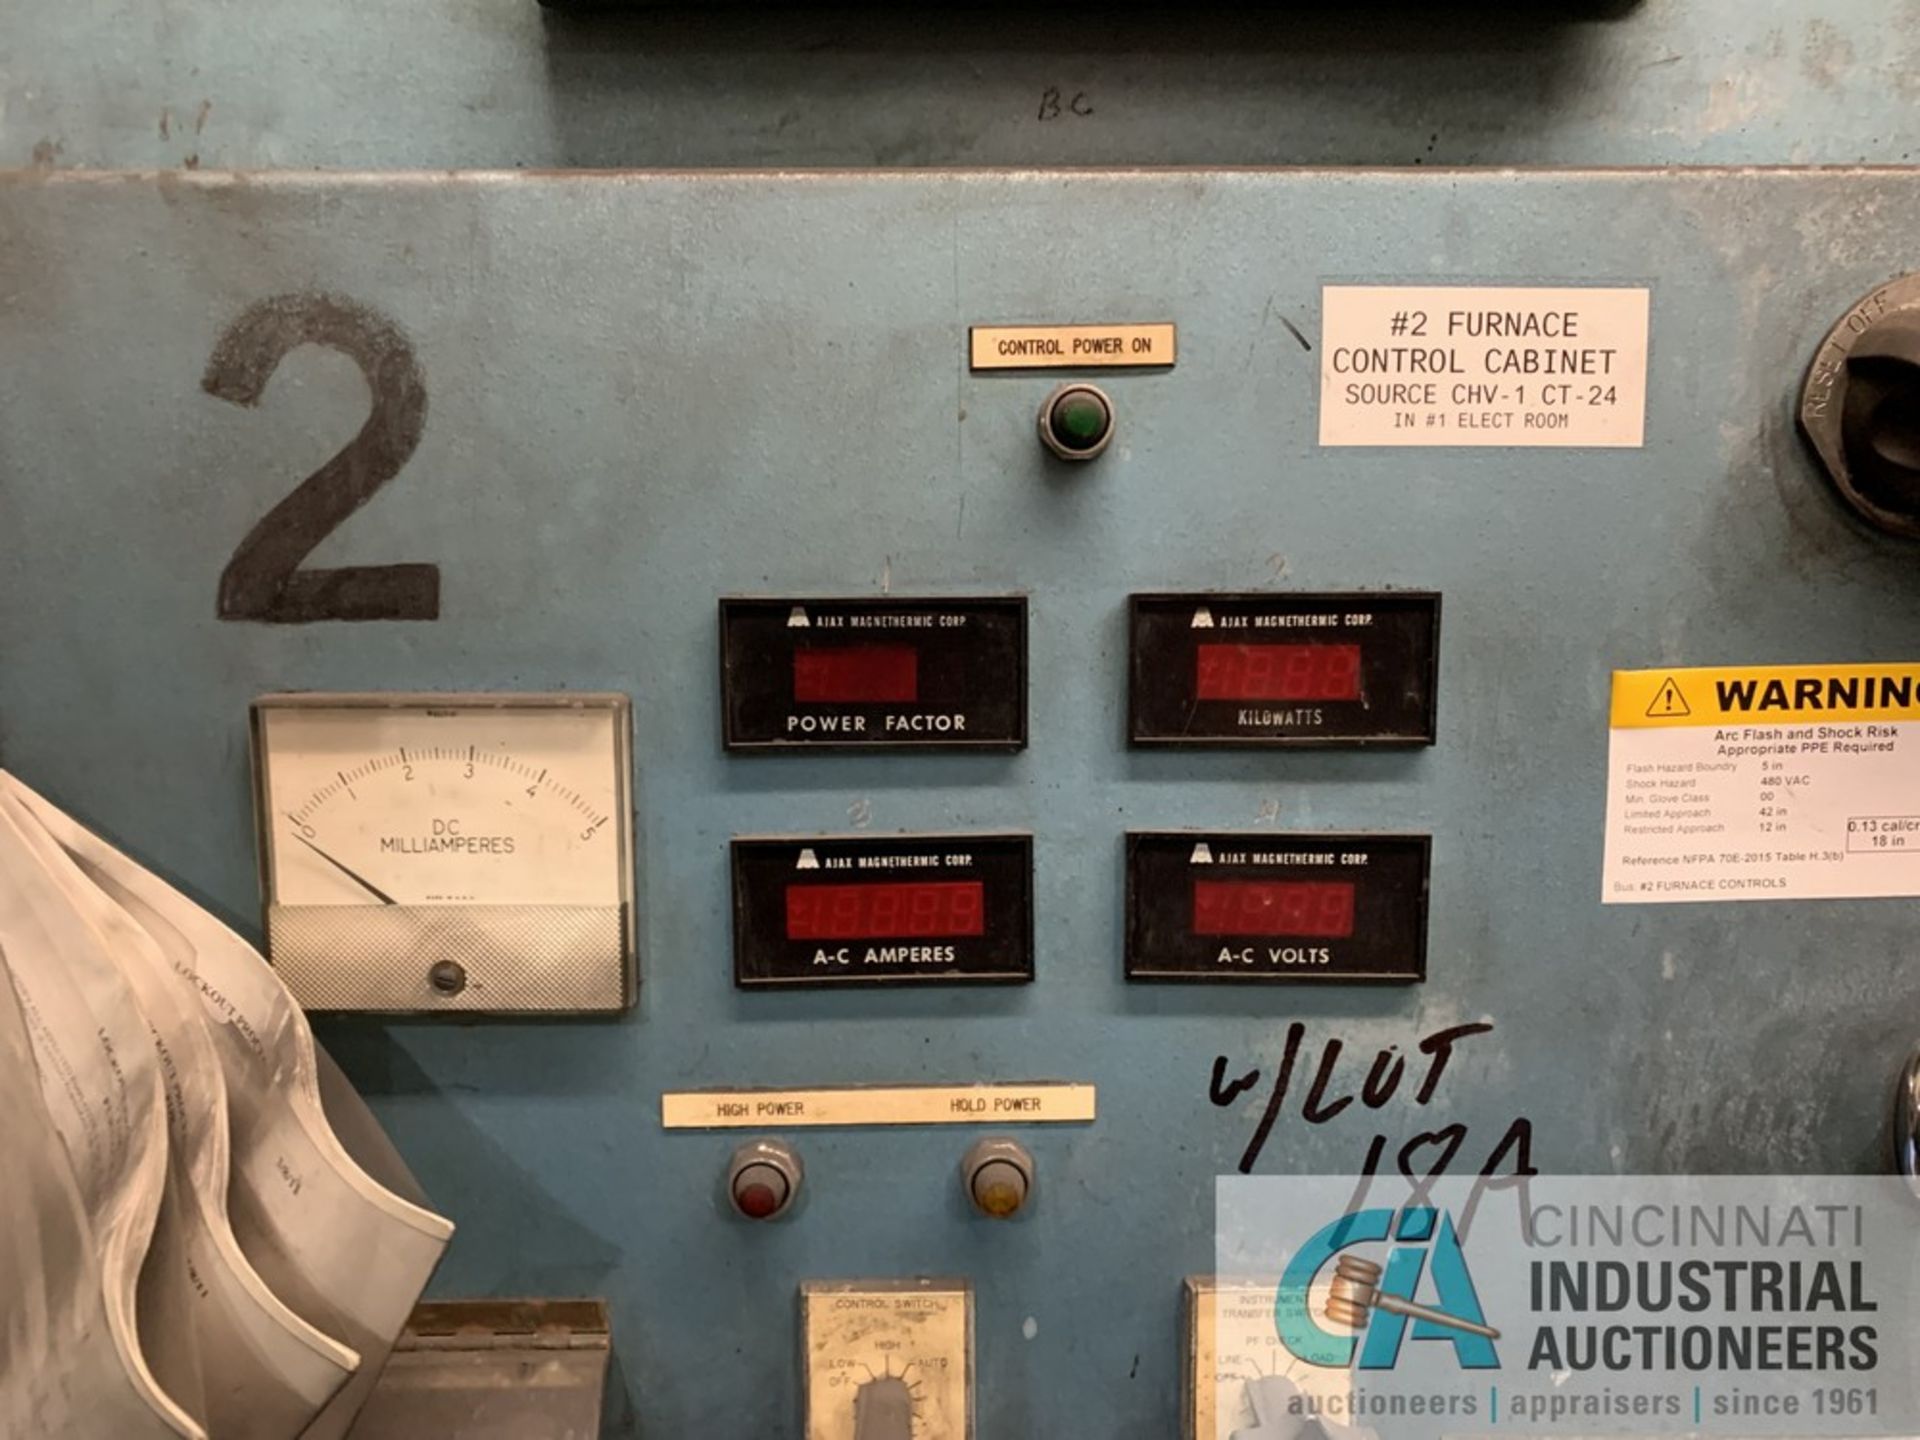 500 KW AJAX MAGNATHERMIC POWER SUPPLY AND CONTROL; 575V, 1,000 KVA, 1,750 AMP, 500 KW, CONTROL PANEL - Image 11 of 14